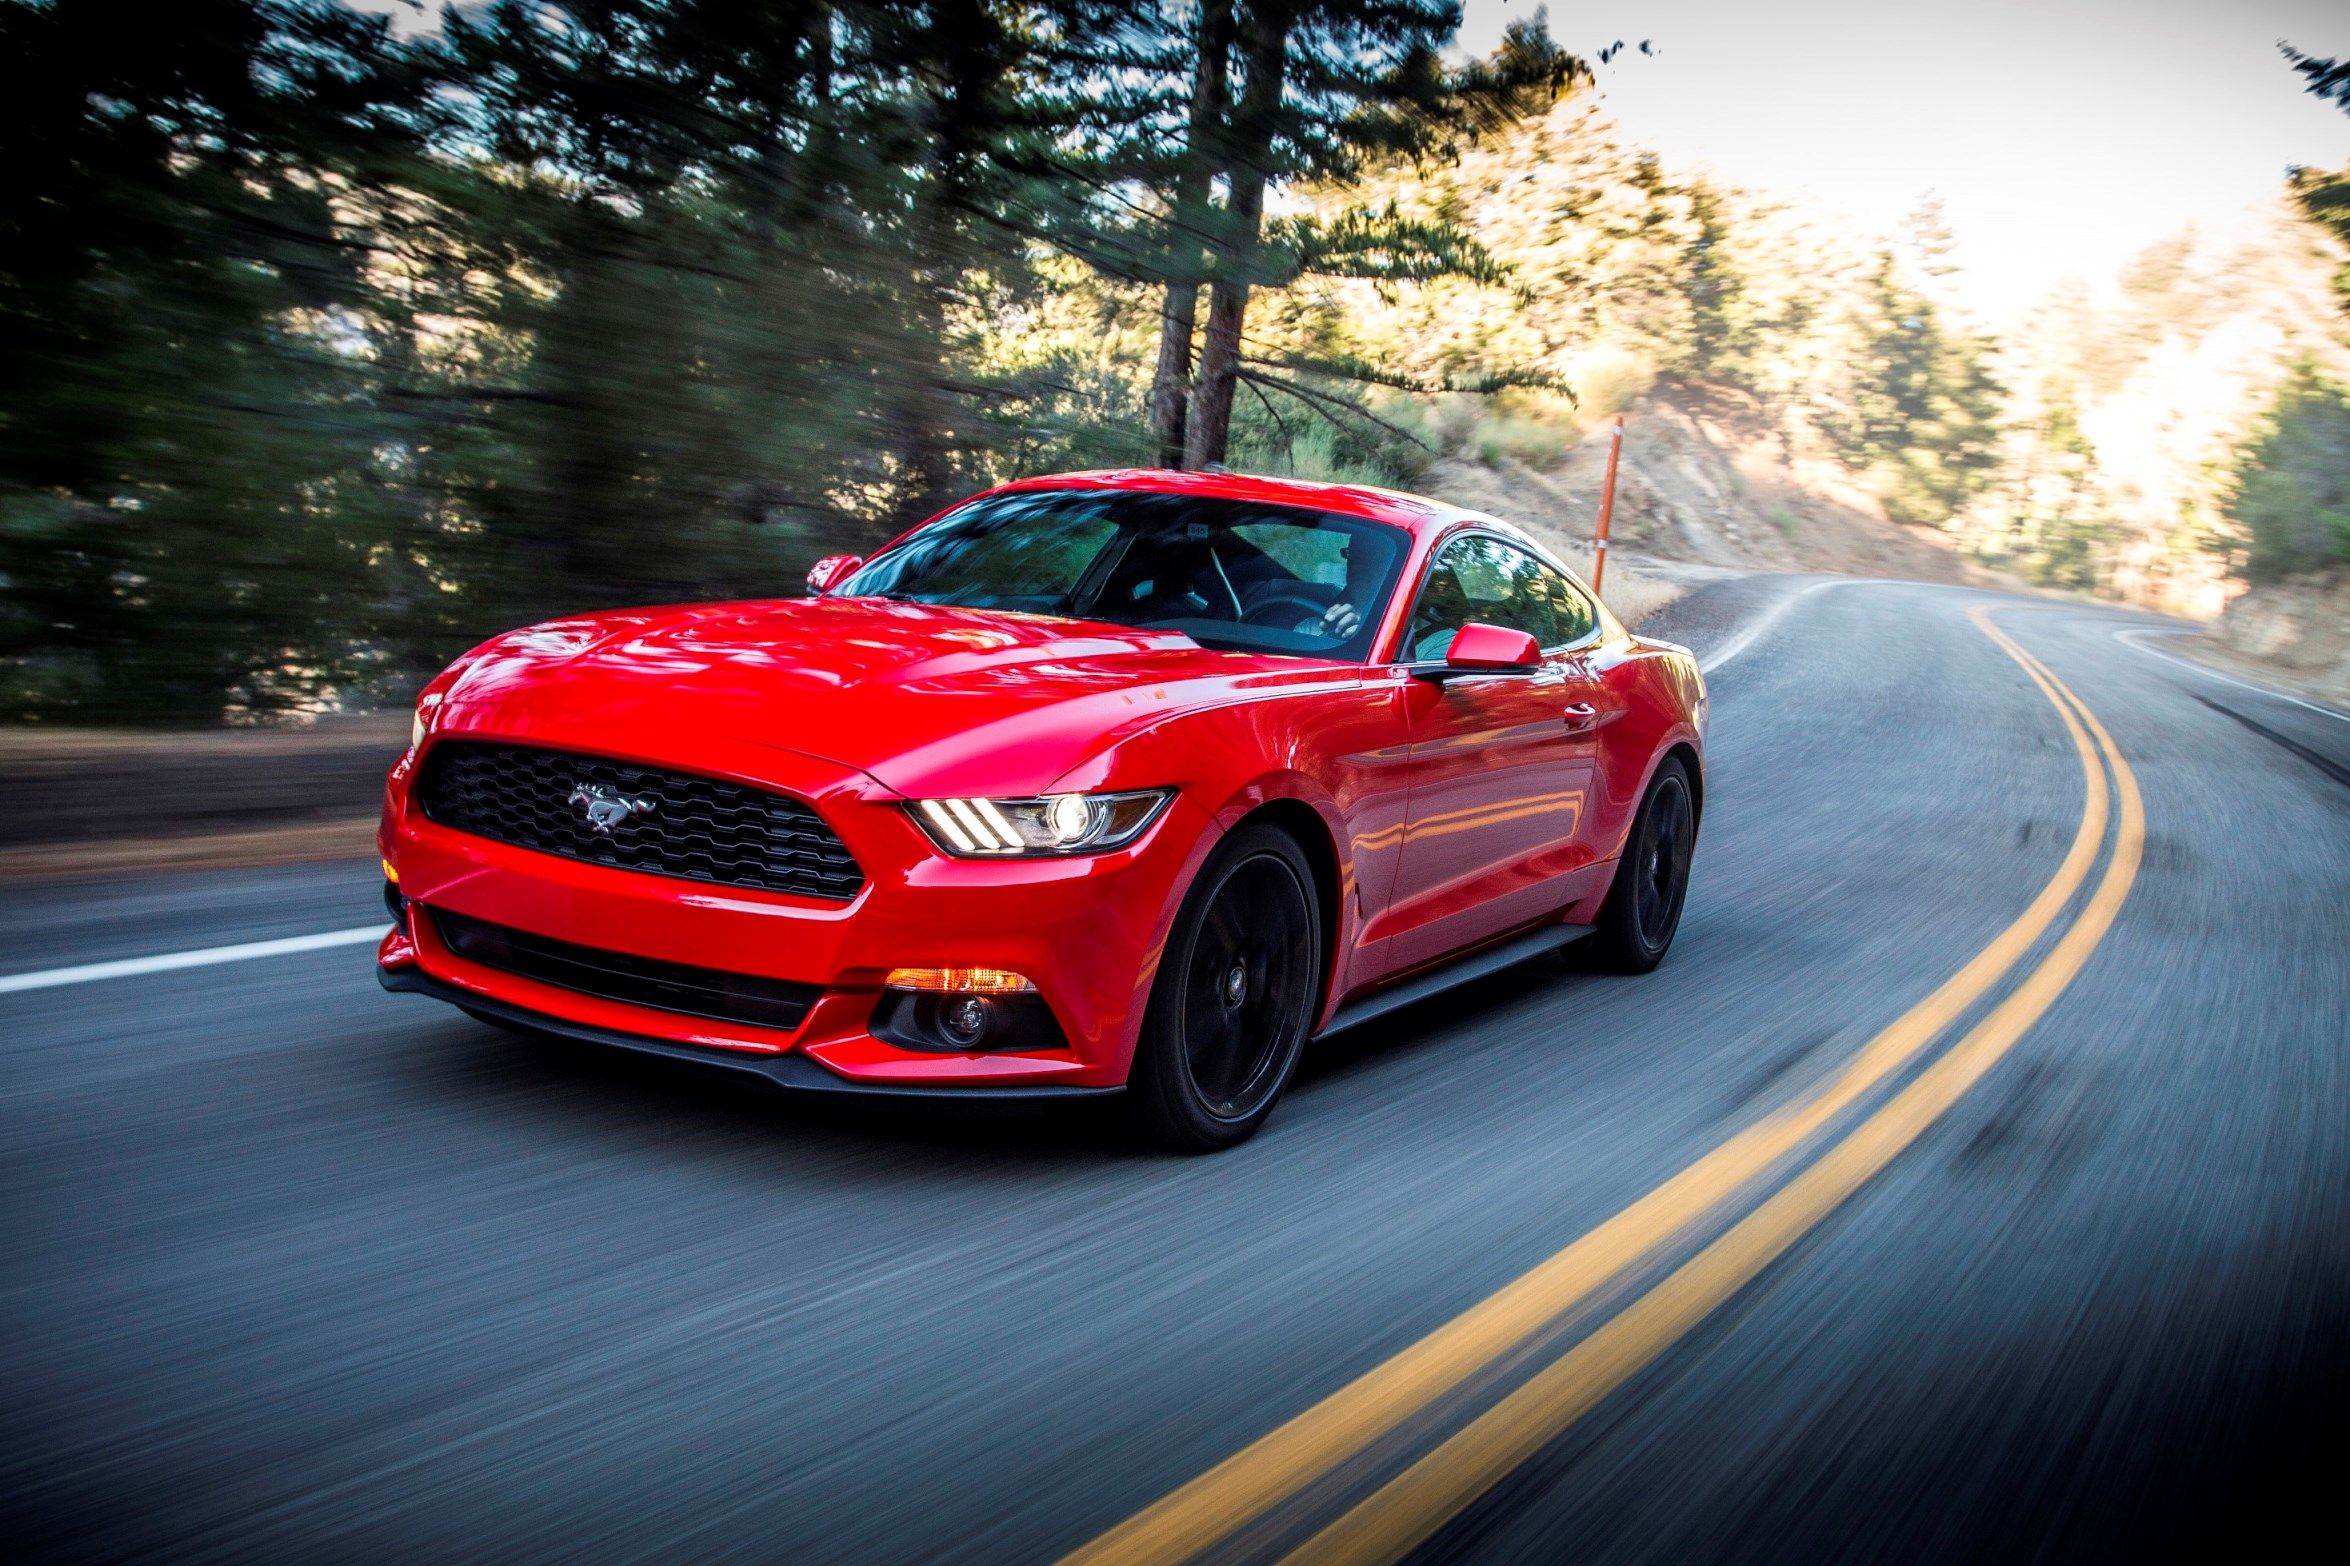 Red Mustang on the Road HD Wallpaper